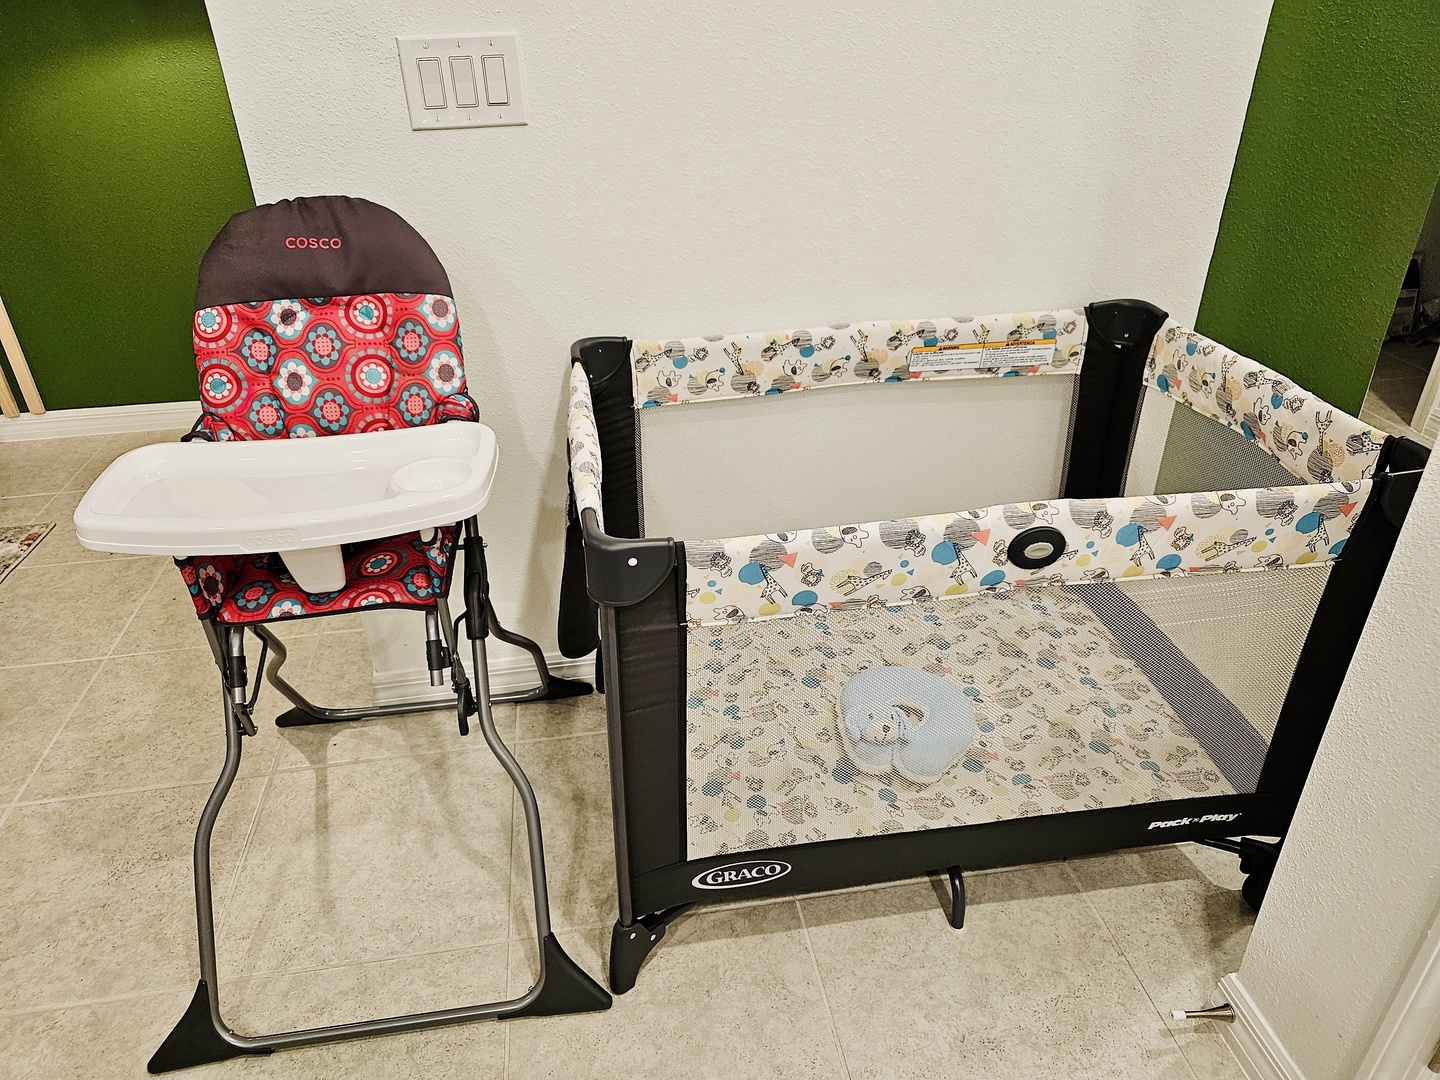 high chair and playpen